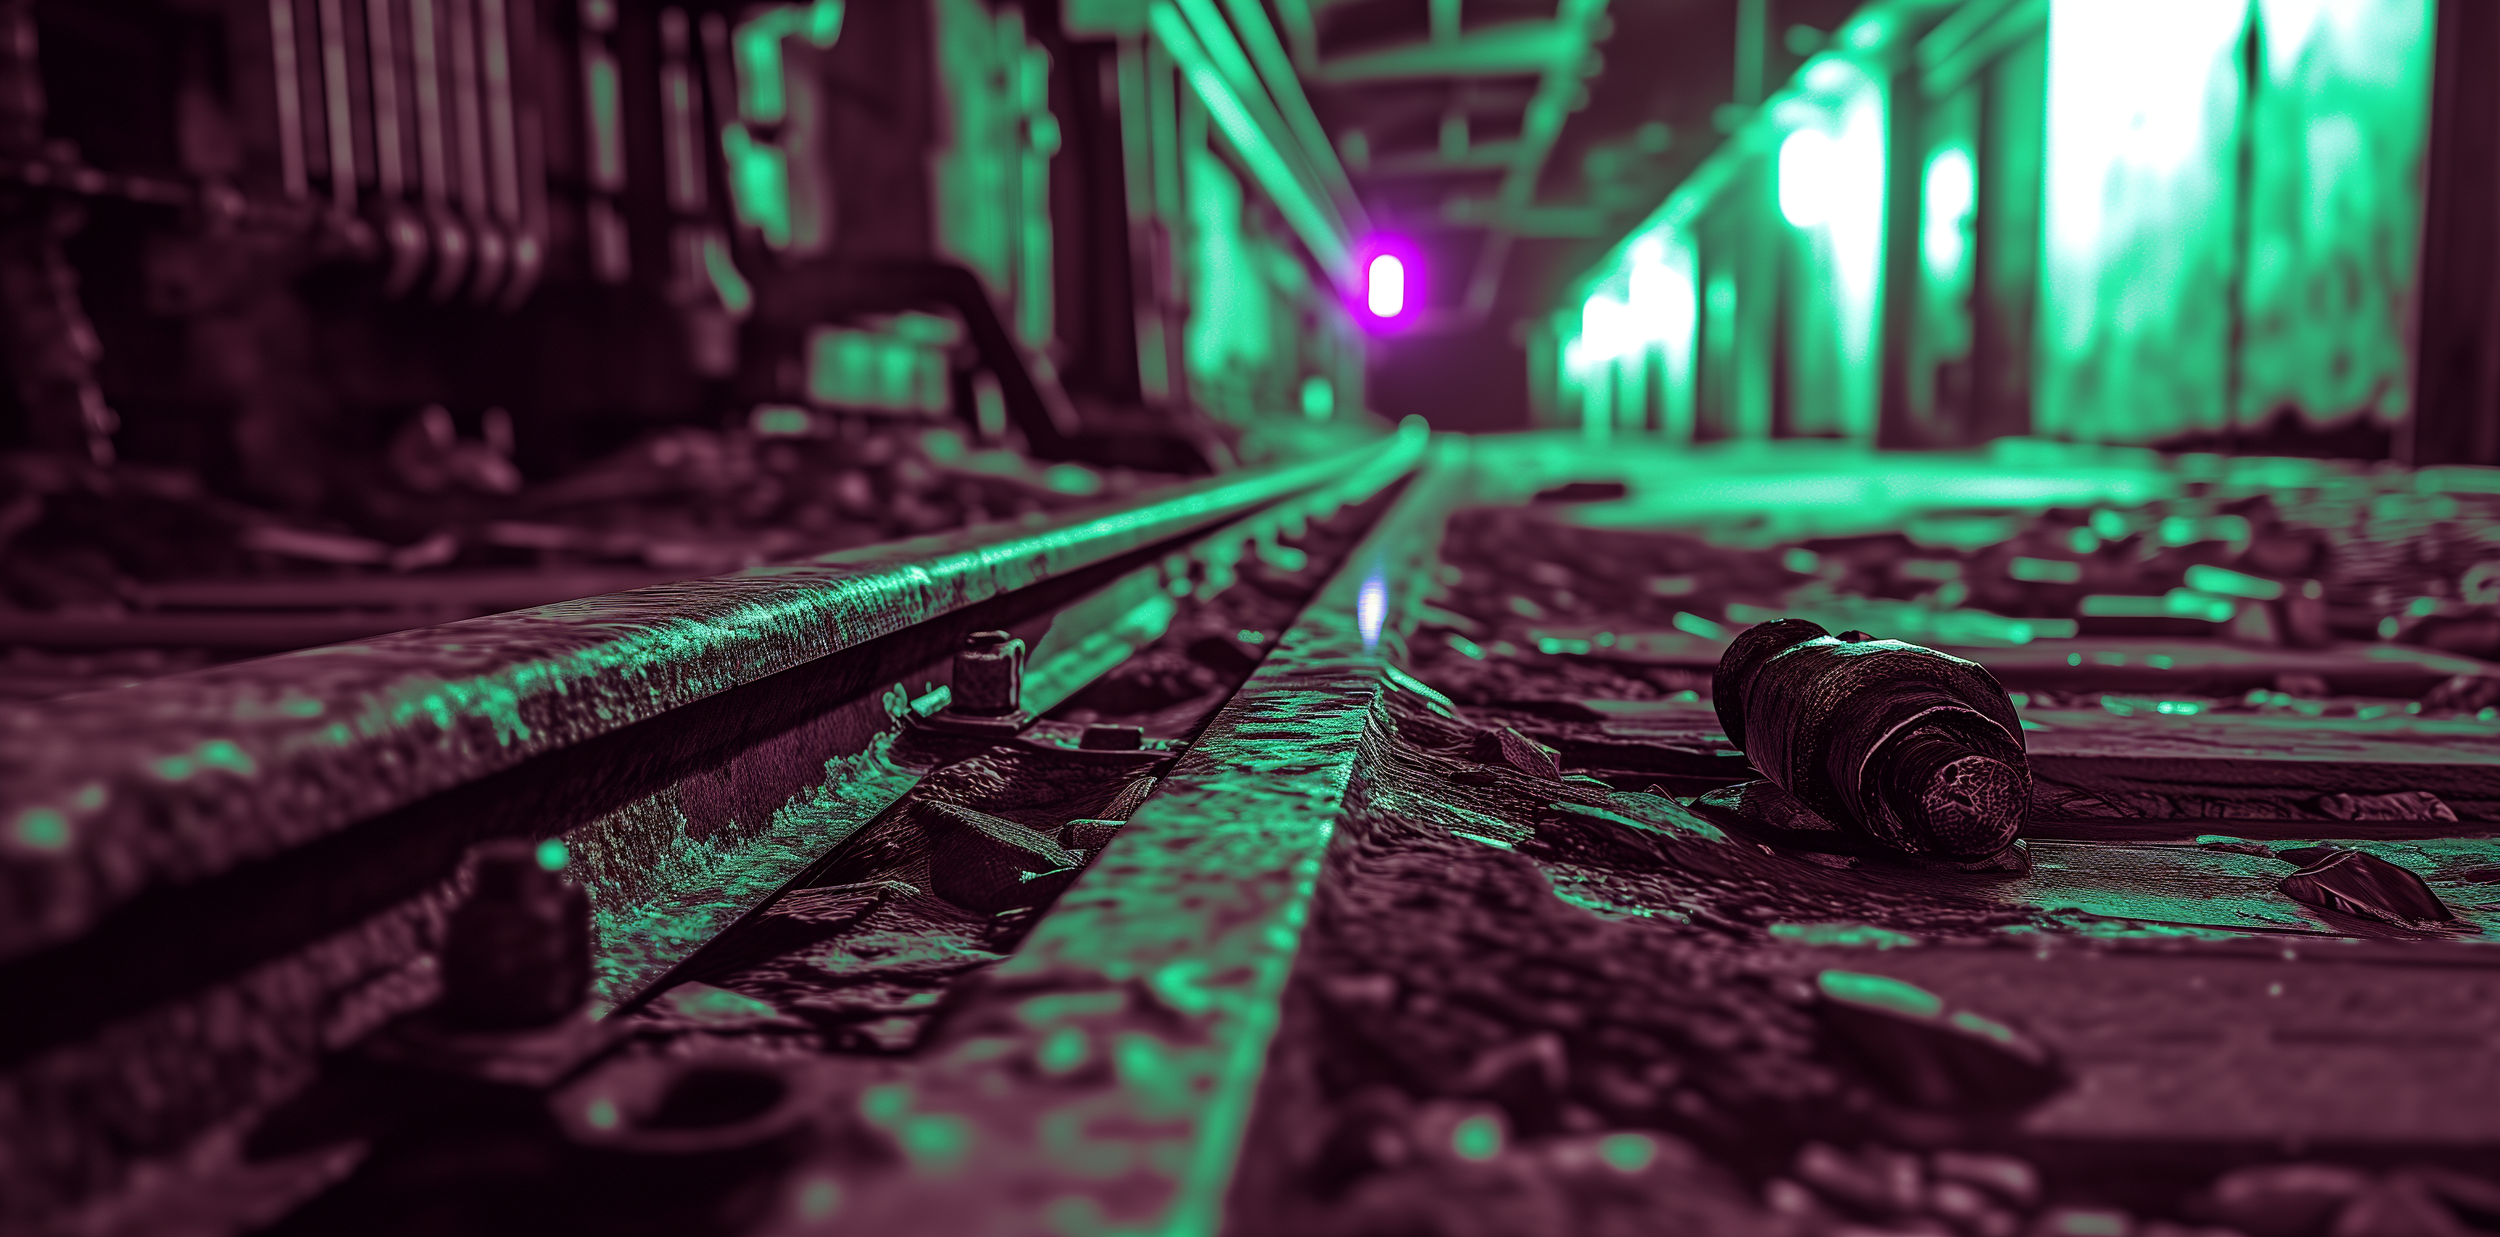 Remnants on the Rails - A Broken Future